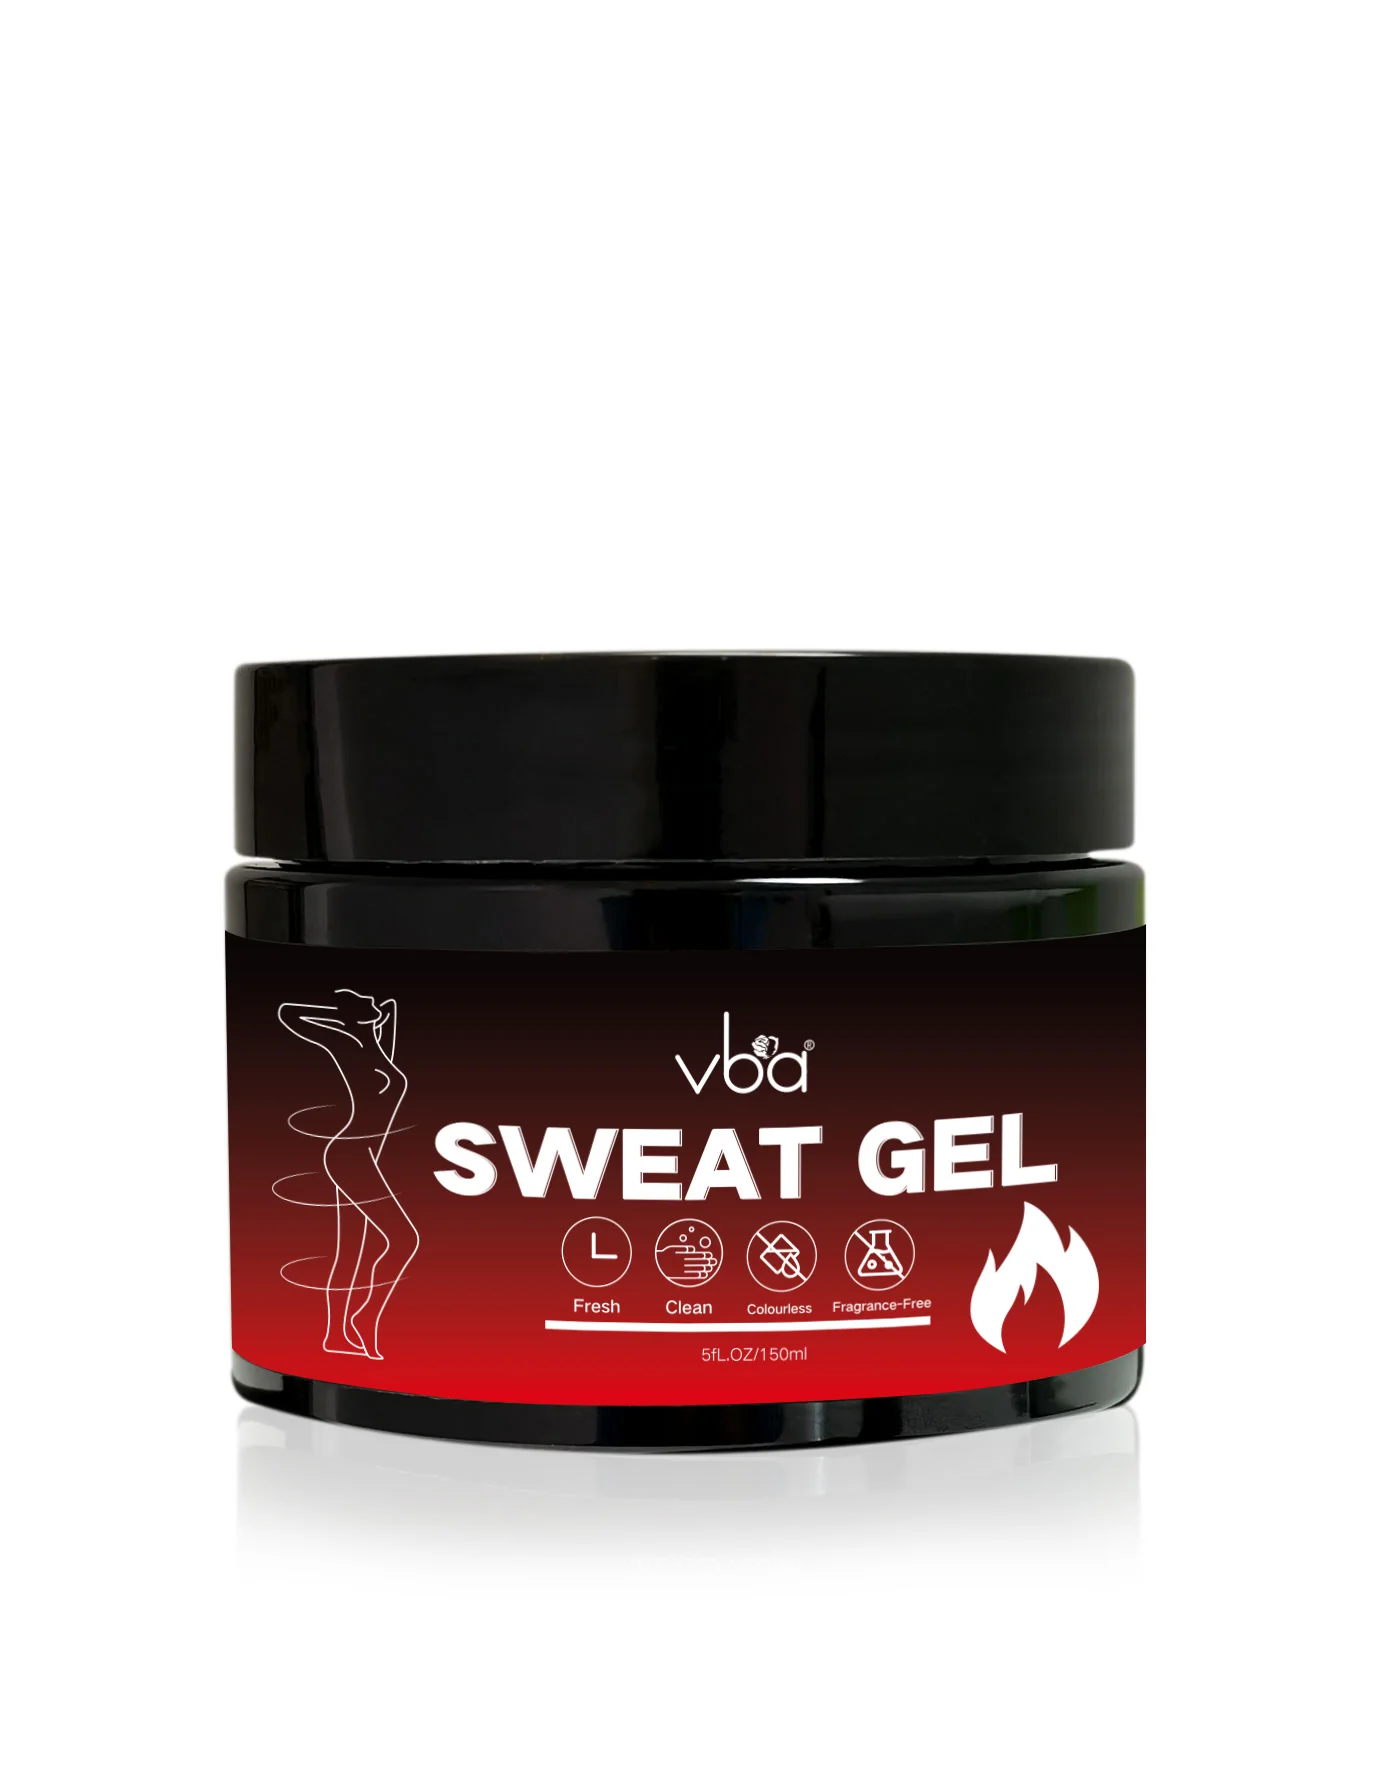 

Private Label Hot Fat Burning Cream 3 days Belly Weight Loss Sweat Workout Gel For Tummy Waist Stomach Body Slimming Cream